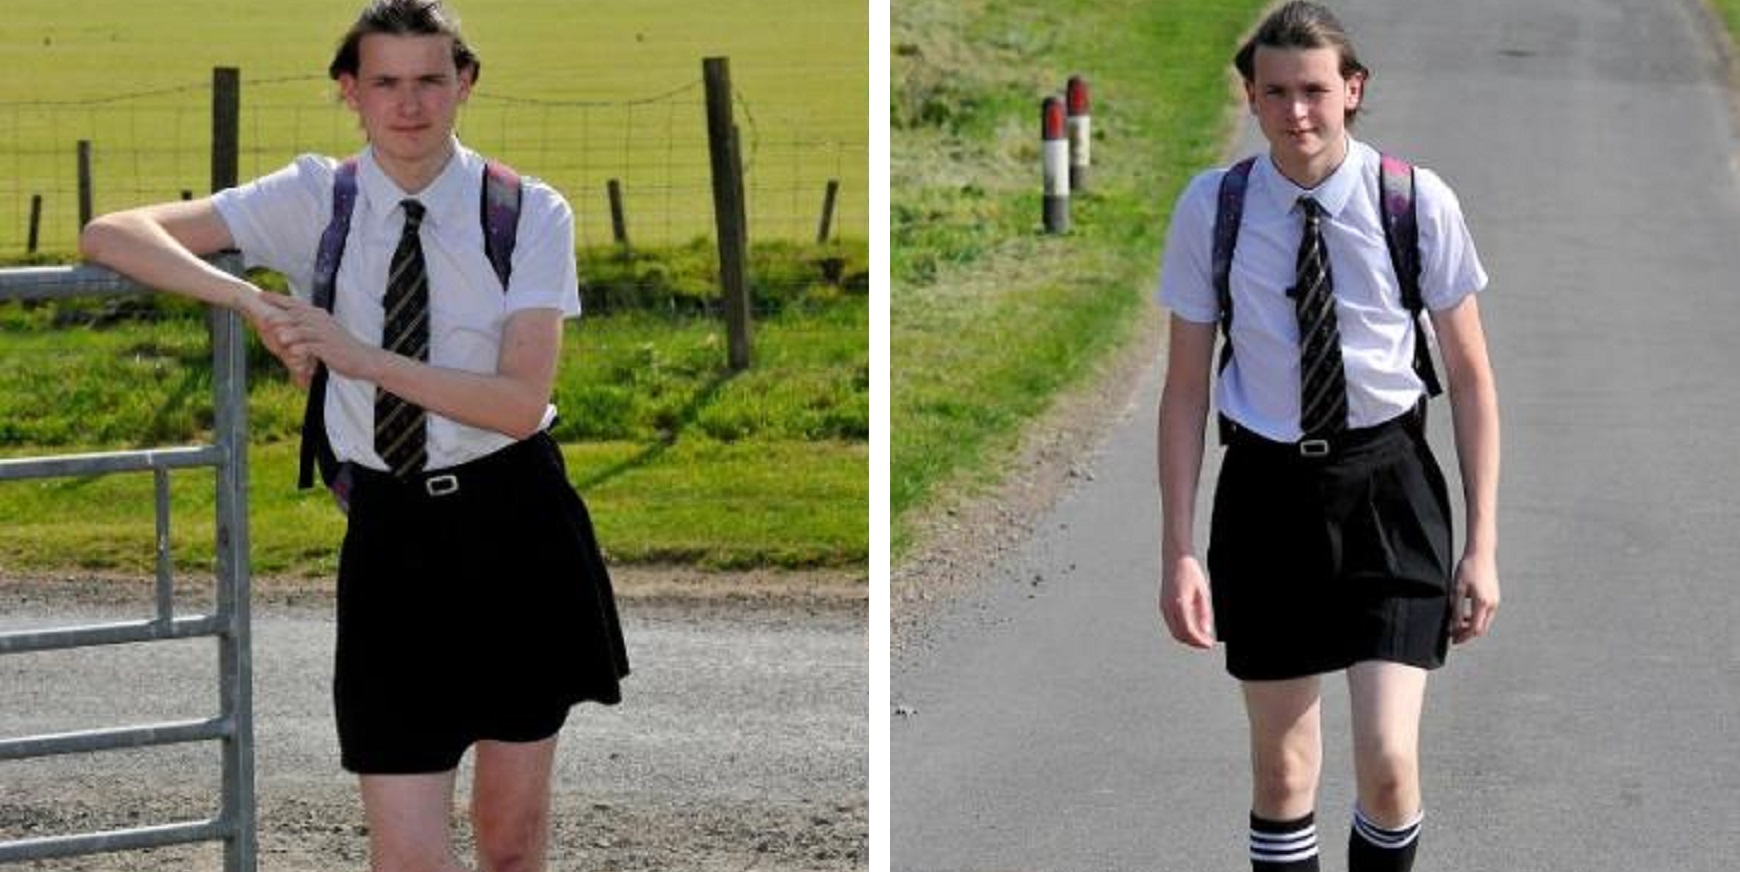 Sent Home For Wearing Shorts On a Hot Day, Schoolboy Returns Wearing a Skirt To School